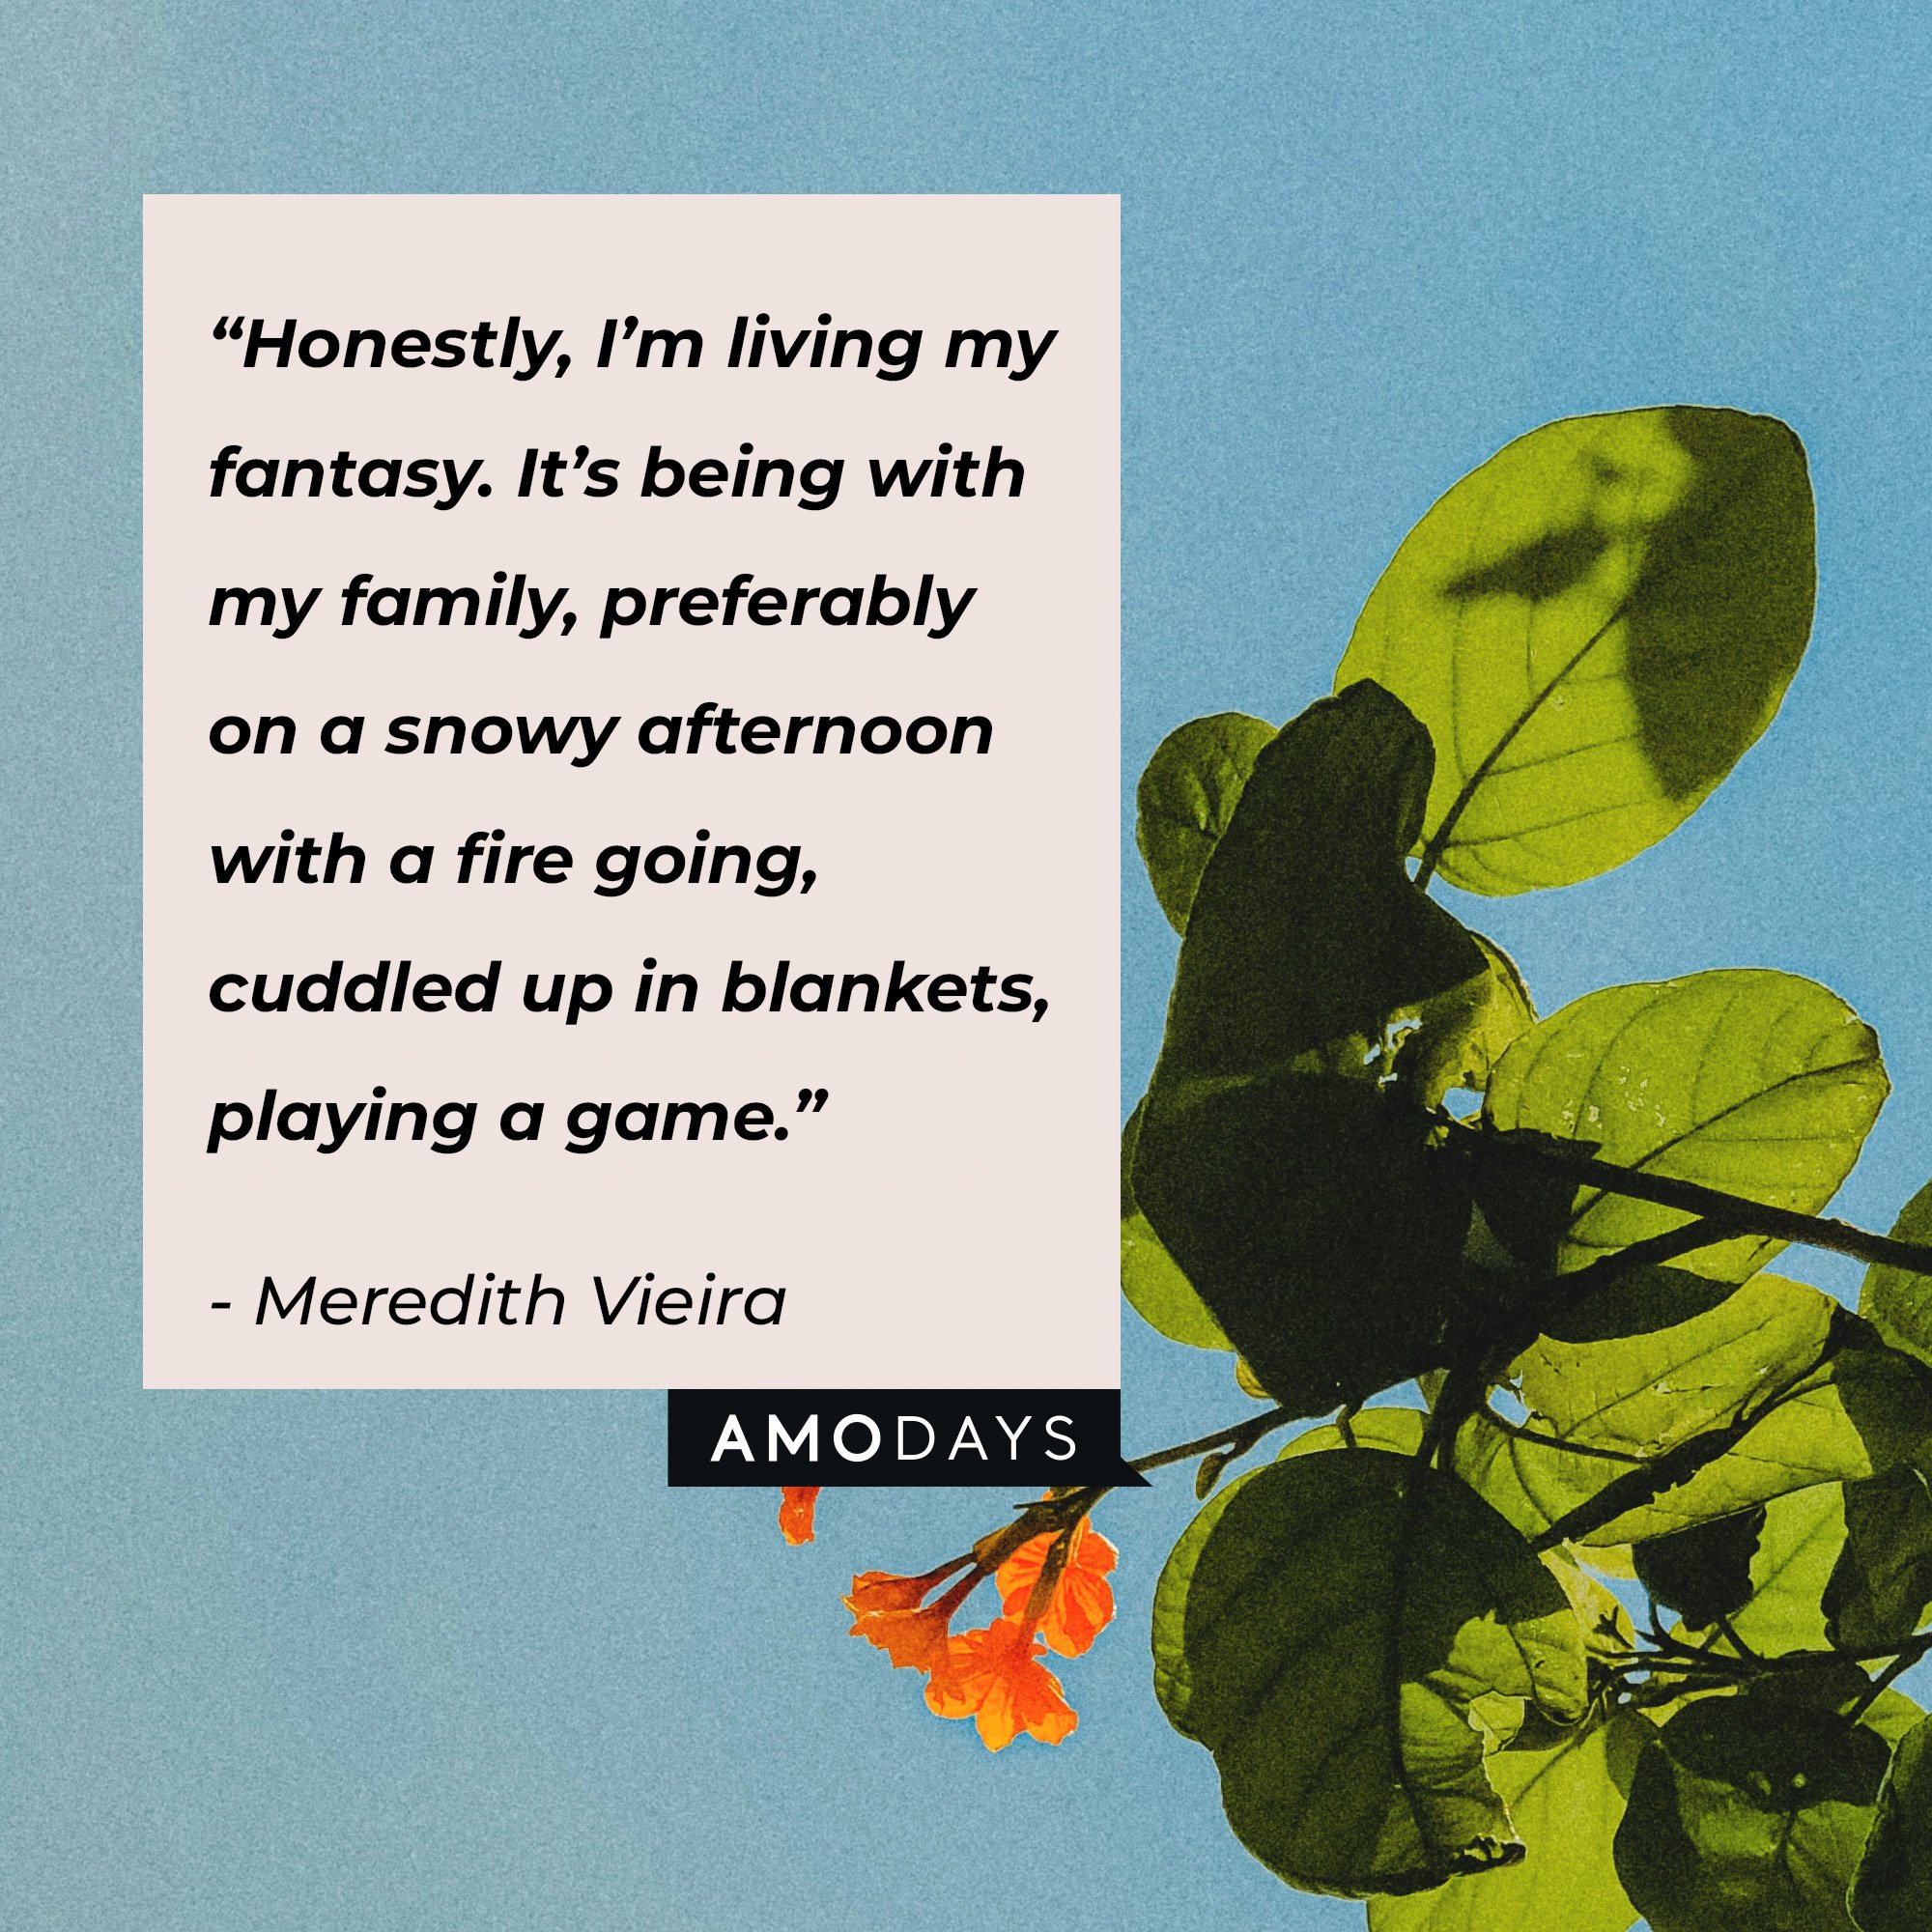 Meredith Vieira's quote: “Honestly, I’m living my fantasy. It’s being with my family, preferably on a snowy afternoon with a fire going, cuddled up in blankets, playing a game.” | Image: AmoDays